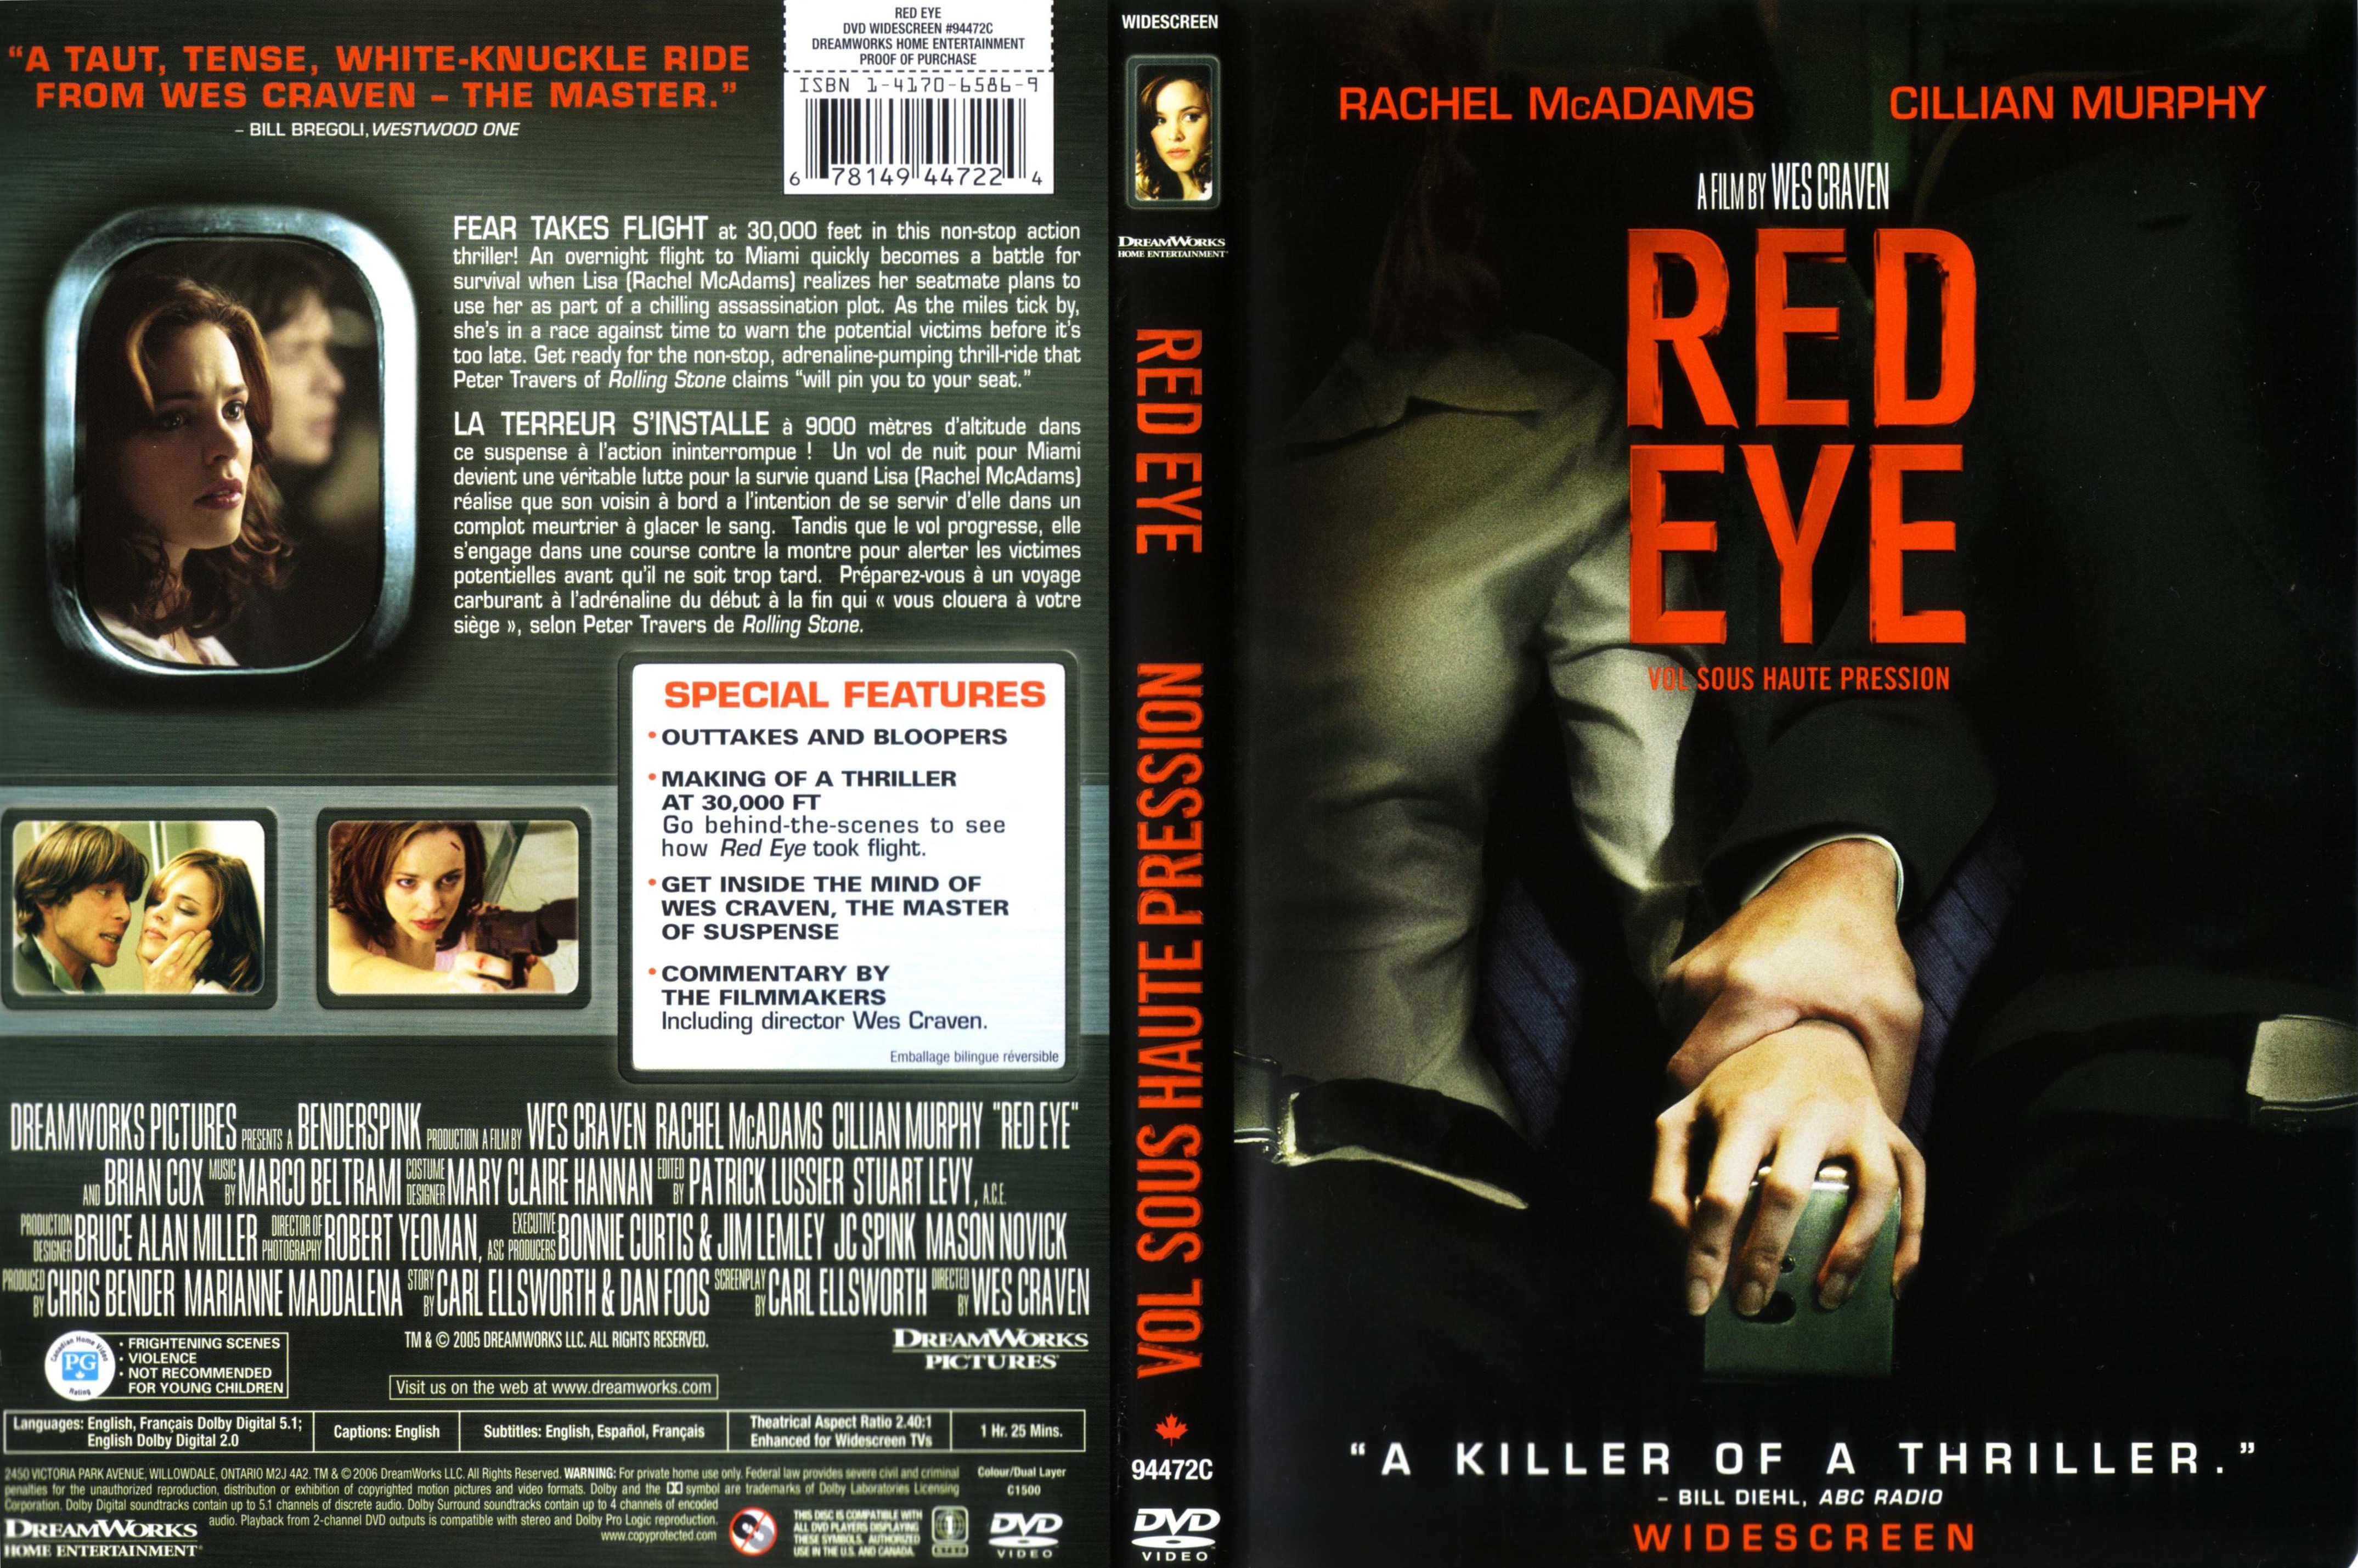 Jaquette DVD Red eye